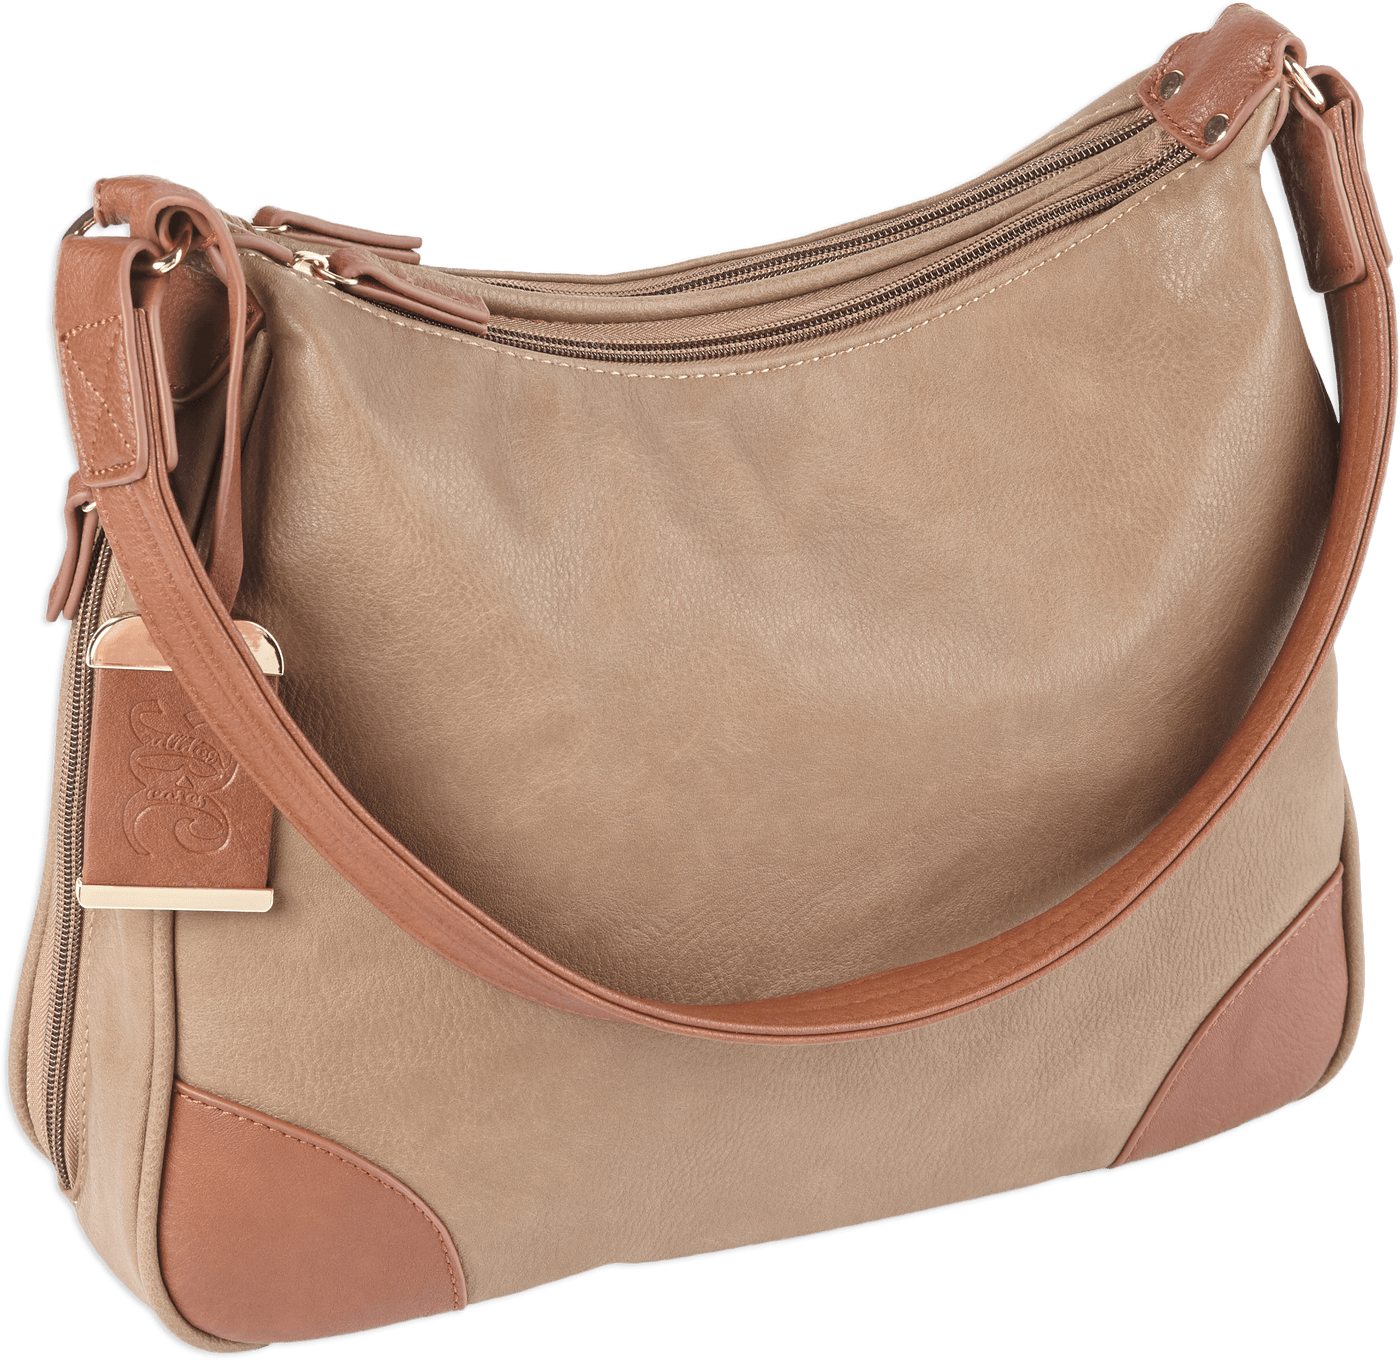 Bulldog Bulldog Concealed Carry Purse - Hobo Style Taupe W/tan Trim Concealed Carry Handbags